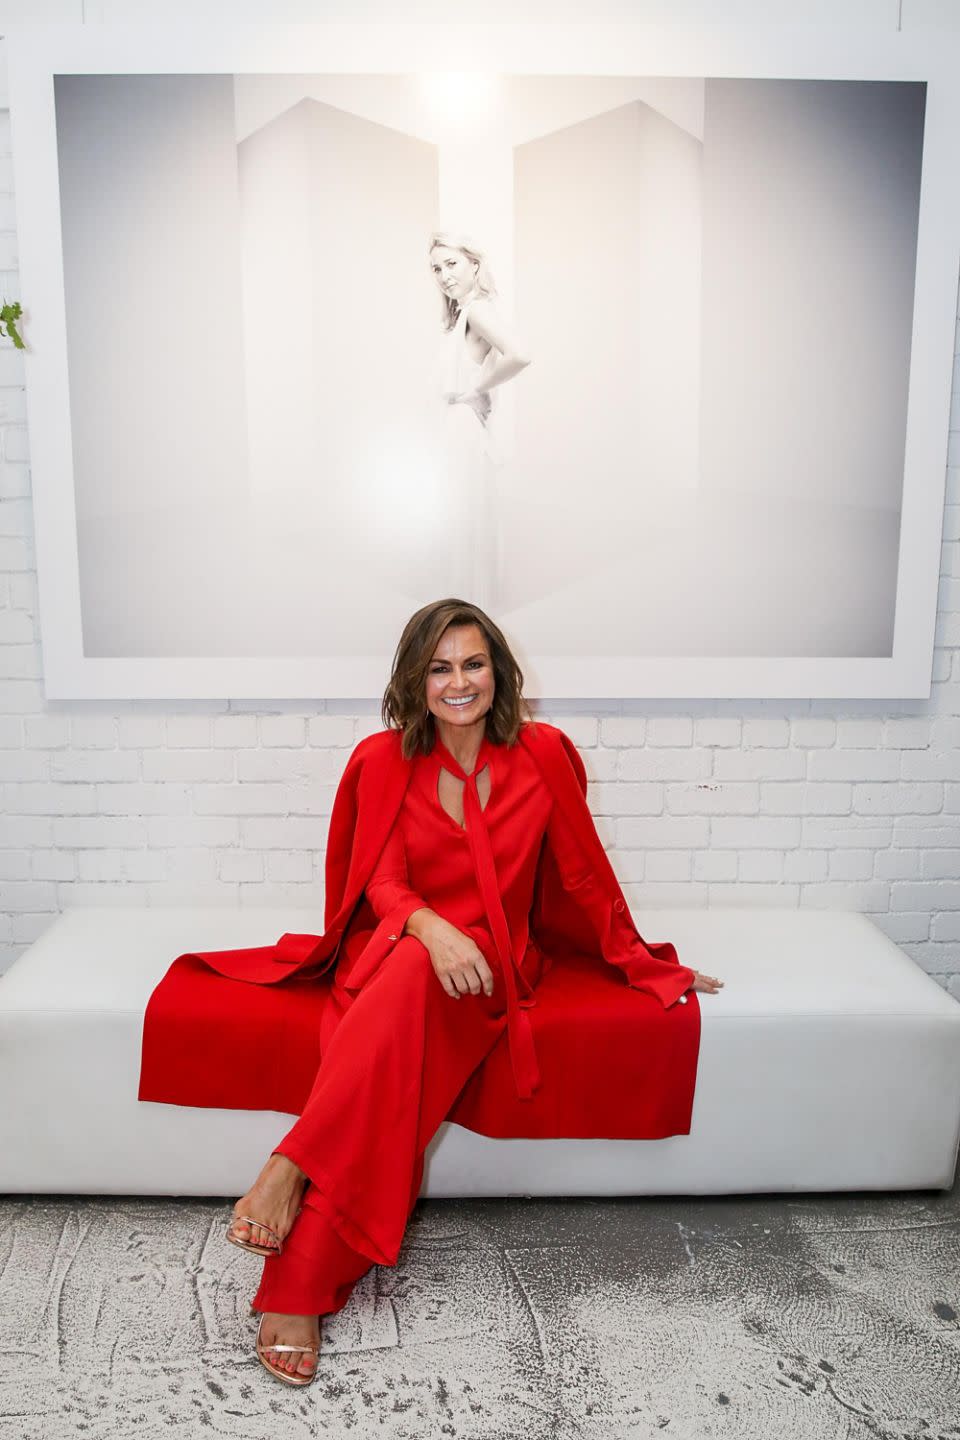 Lisa Wilkinson arrives ahead of Lisa Wilkinson's 'Women of Influence' photographic exhibition at SmartArtz Gallery on October 28, 2016 in Melbourne, Australia. Source: Getty